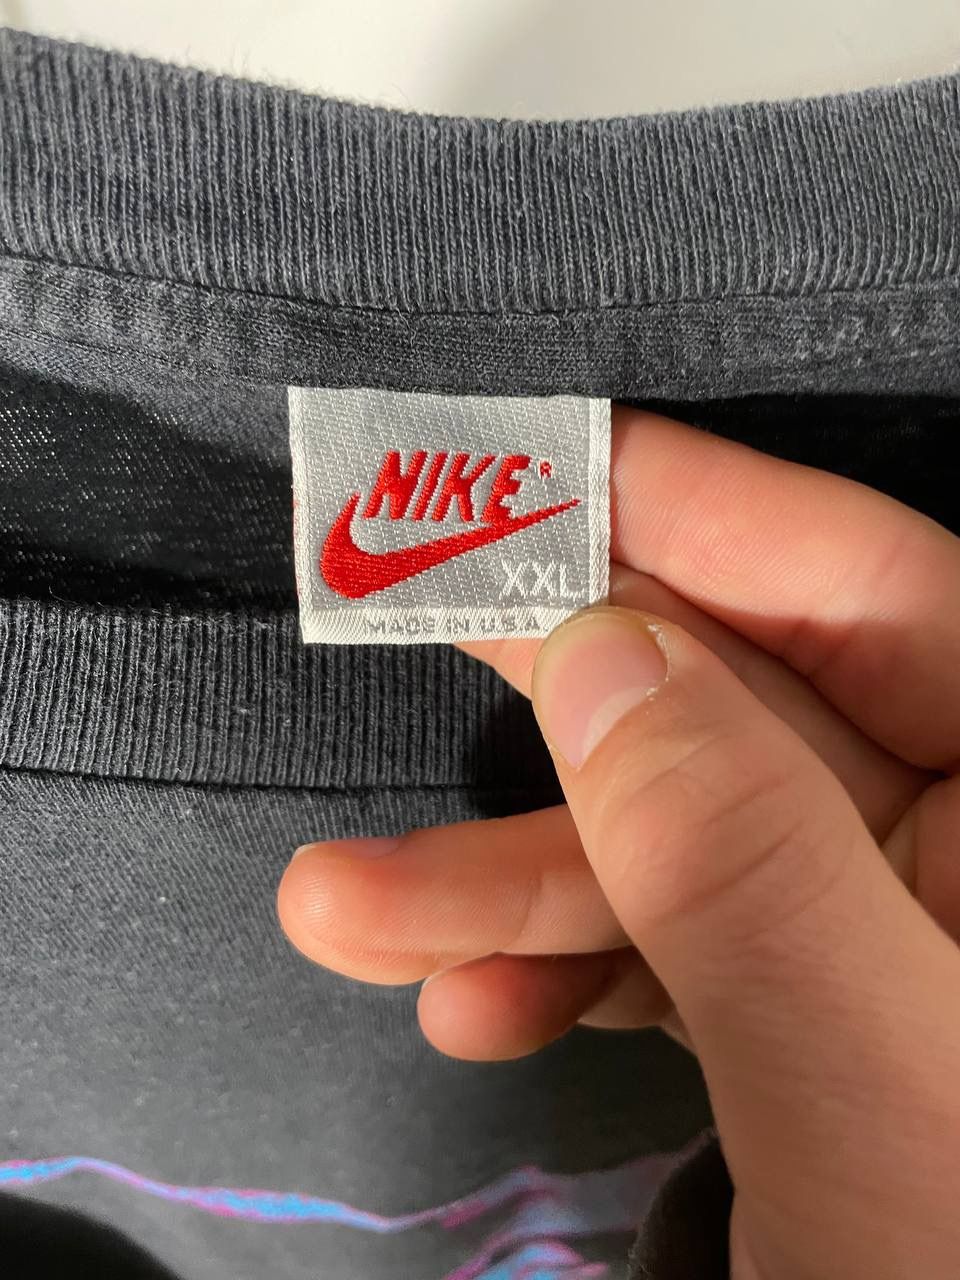 Nike Nike vintage Tee 80s made in USA Size US XXL / EU 58 / 5 - 3 Preview